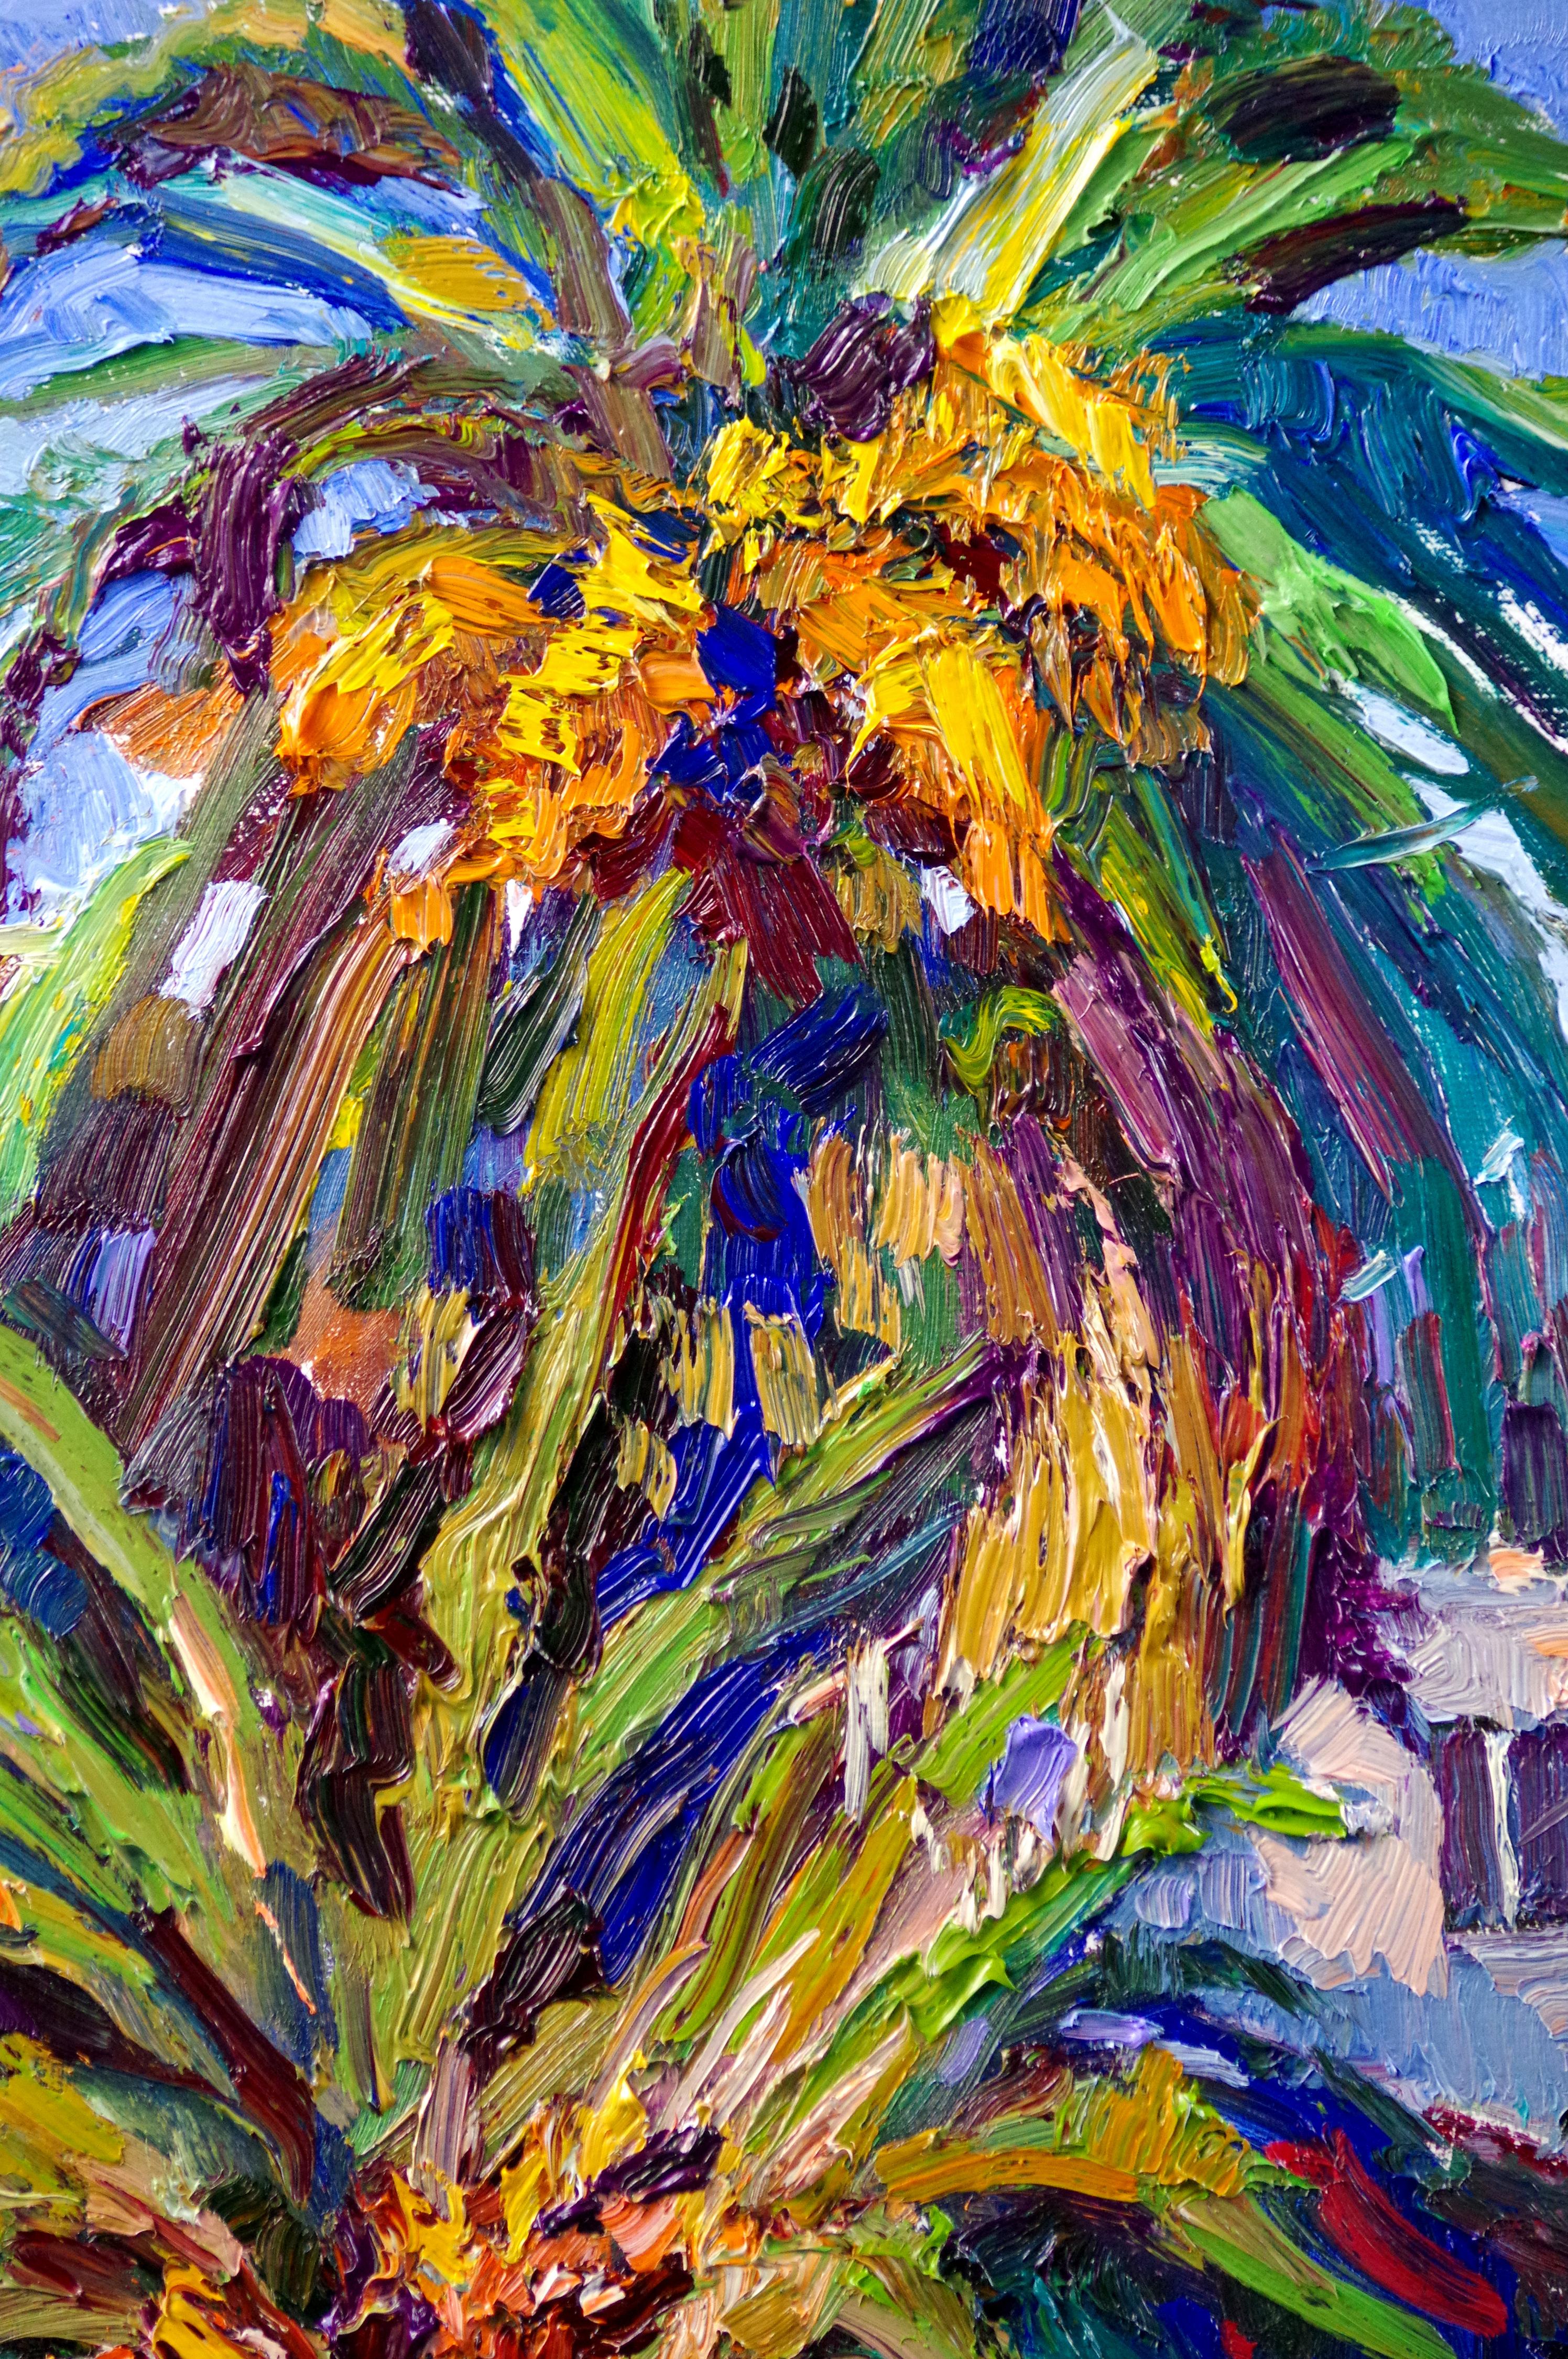 <p>Artist Comments<br> I used thick, dynamic texture and expressive brushstrokes to indicate the contrast of summer beauty. Warm colors provide energy. </p><br/><p>About the Artist<br>Suren is an impressionist painter eloquently capturing nature,